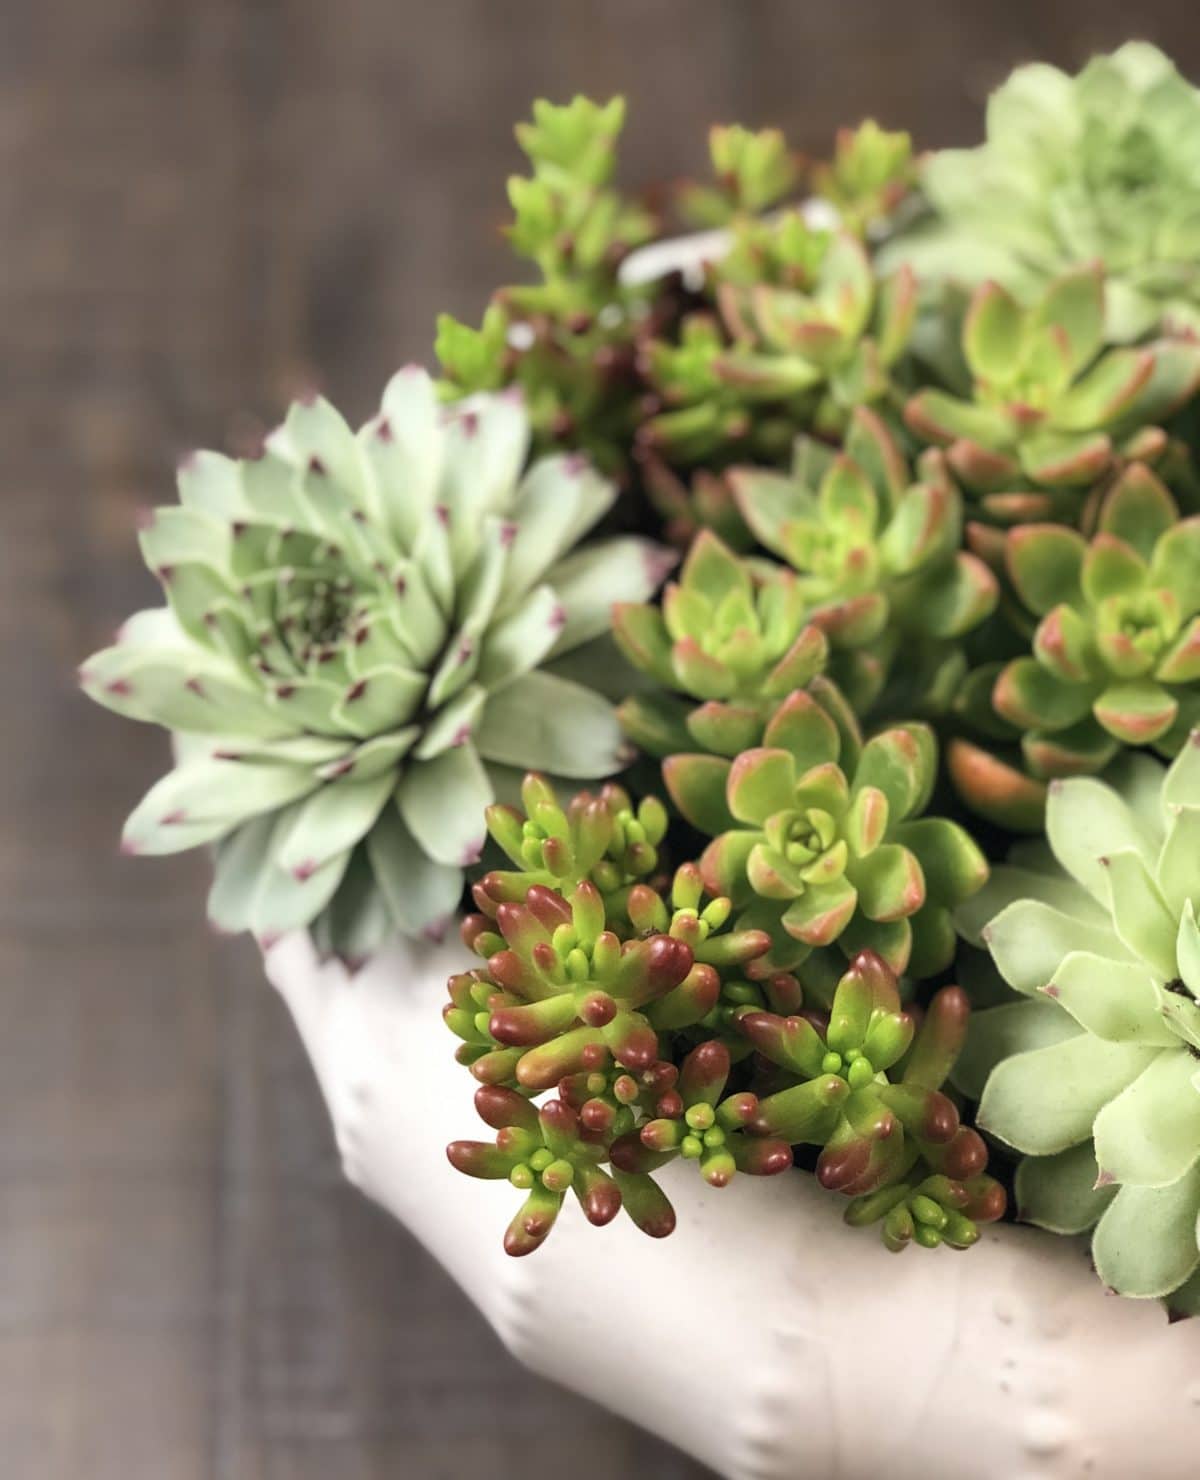 Learn all about caring for hens and chicks!